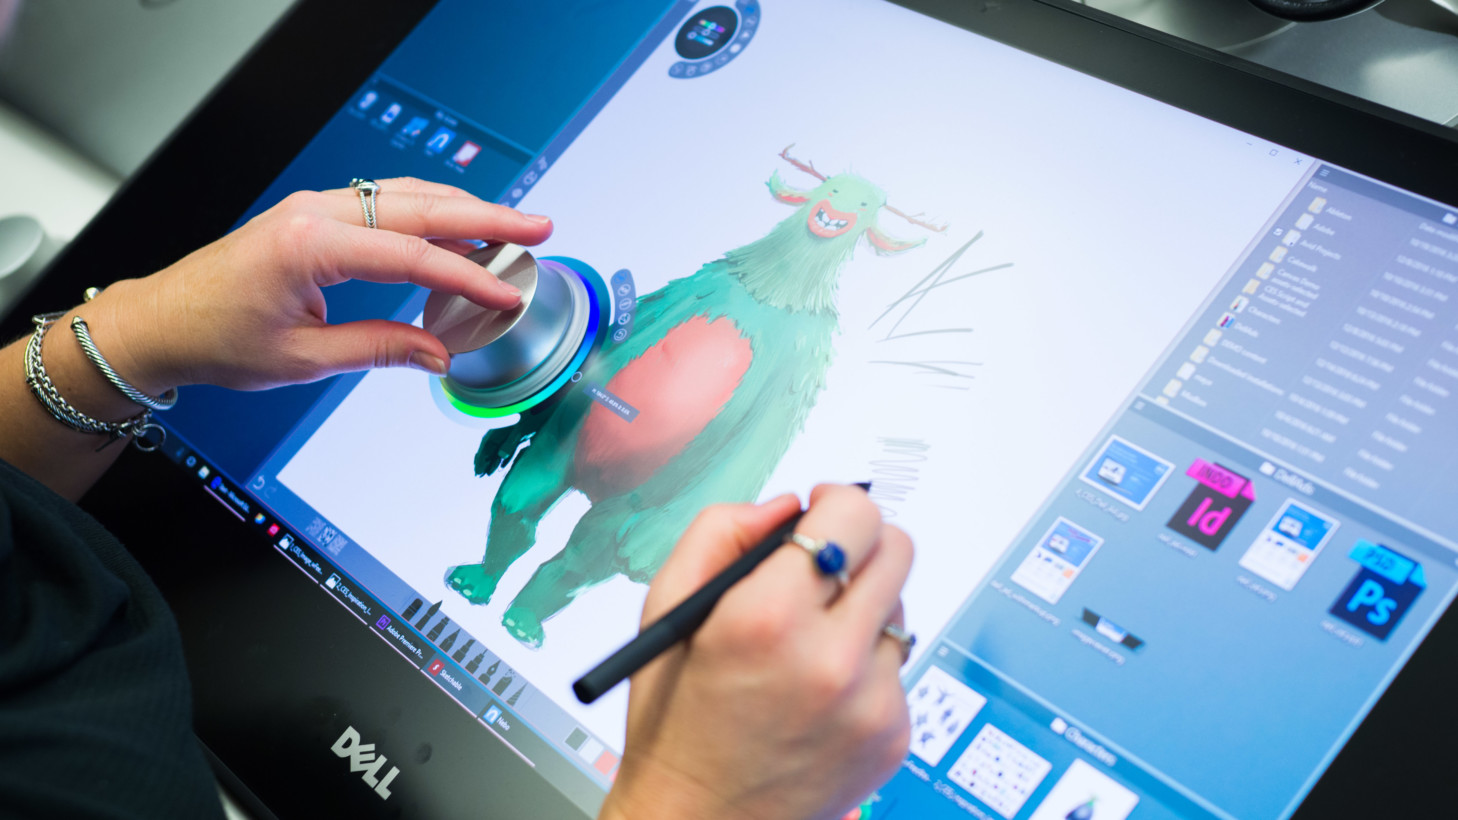 Dell takes on the Surface Studio with a ginormous drawing tablet